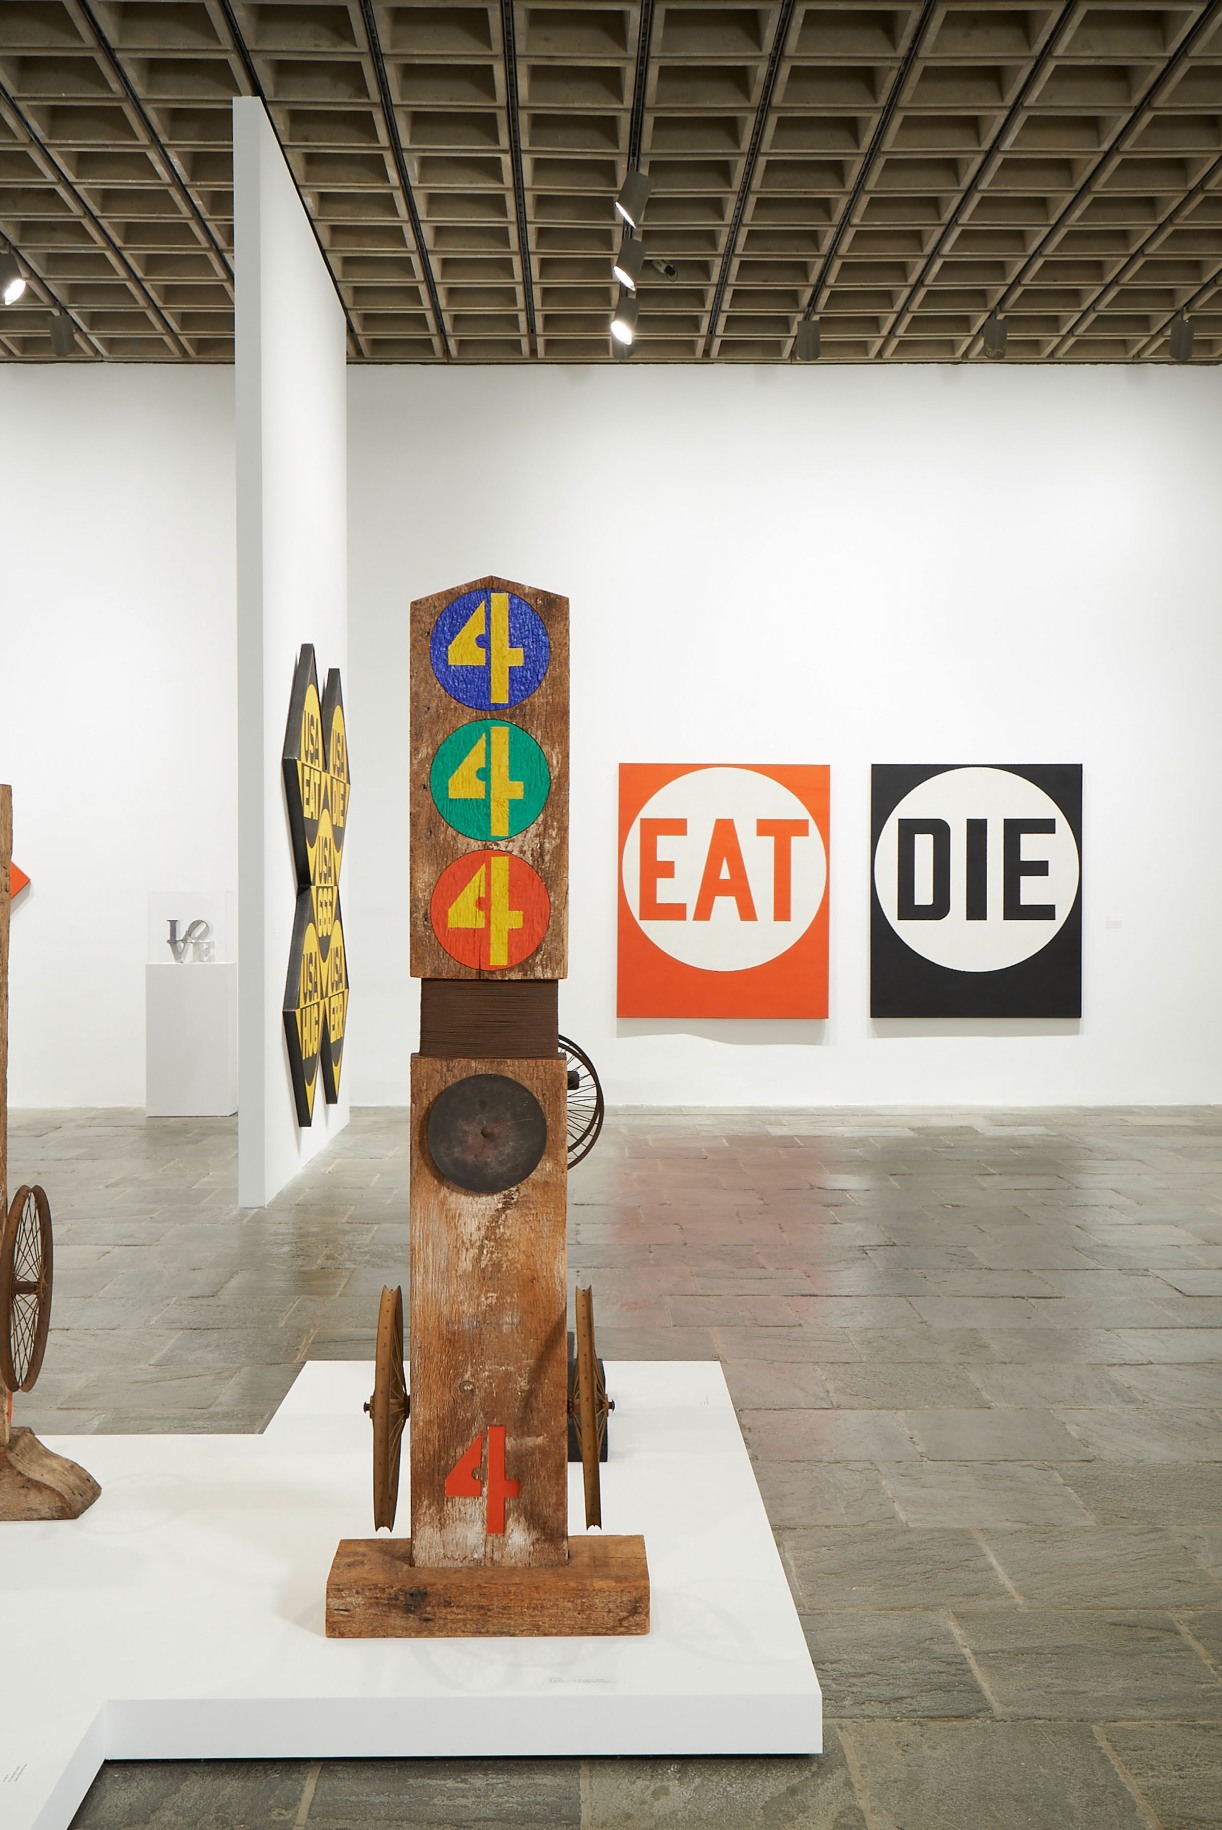 Installation view of Robert Indiana: Beyond LOVE, Whitney Museum of American Art, New York, September 26, 2013&ndash;January 5, 2014. Left to right, LOVE (1966&ndash;1968),&nbsp;USA 666 (The Sixth American Dream) (1964&ndash;66),&nbsp;Four (1959&ndash;62/1972), and Eat/Die (1962), &nbsp;